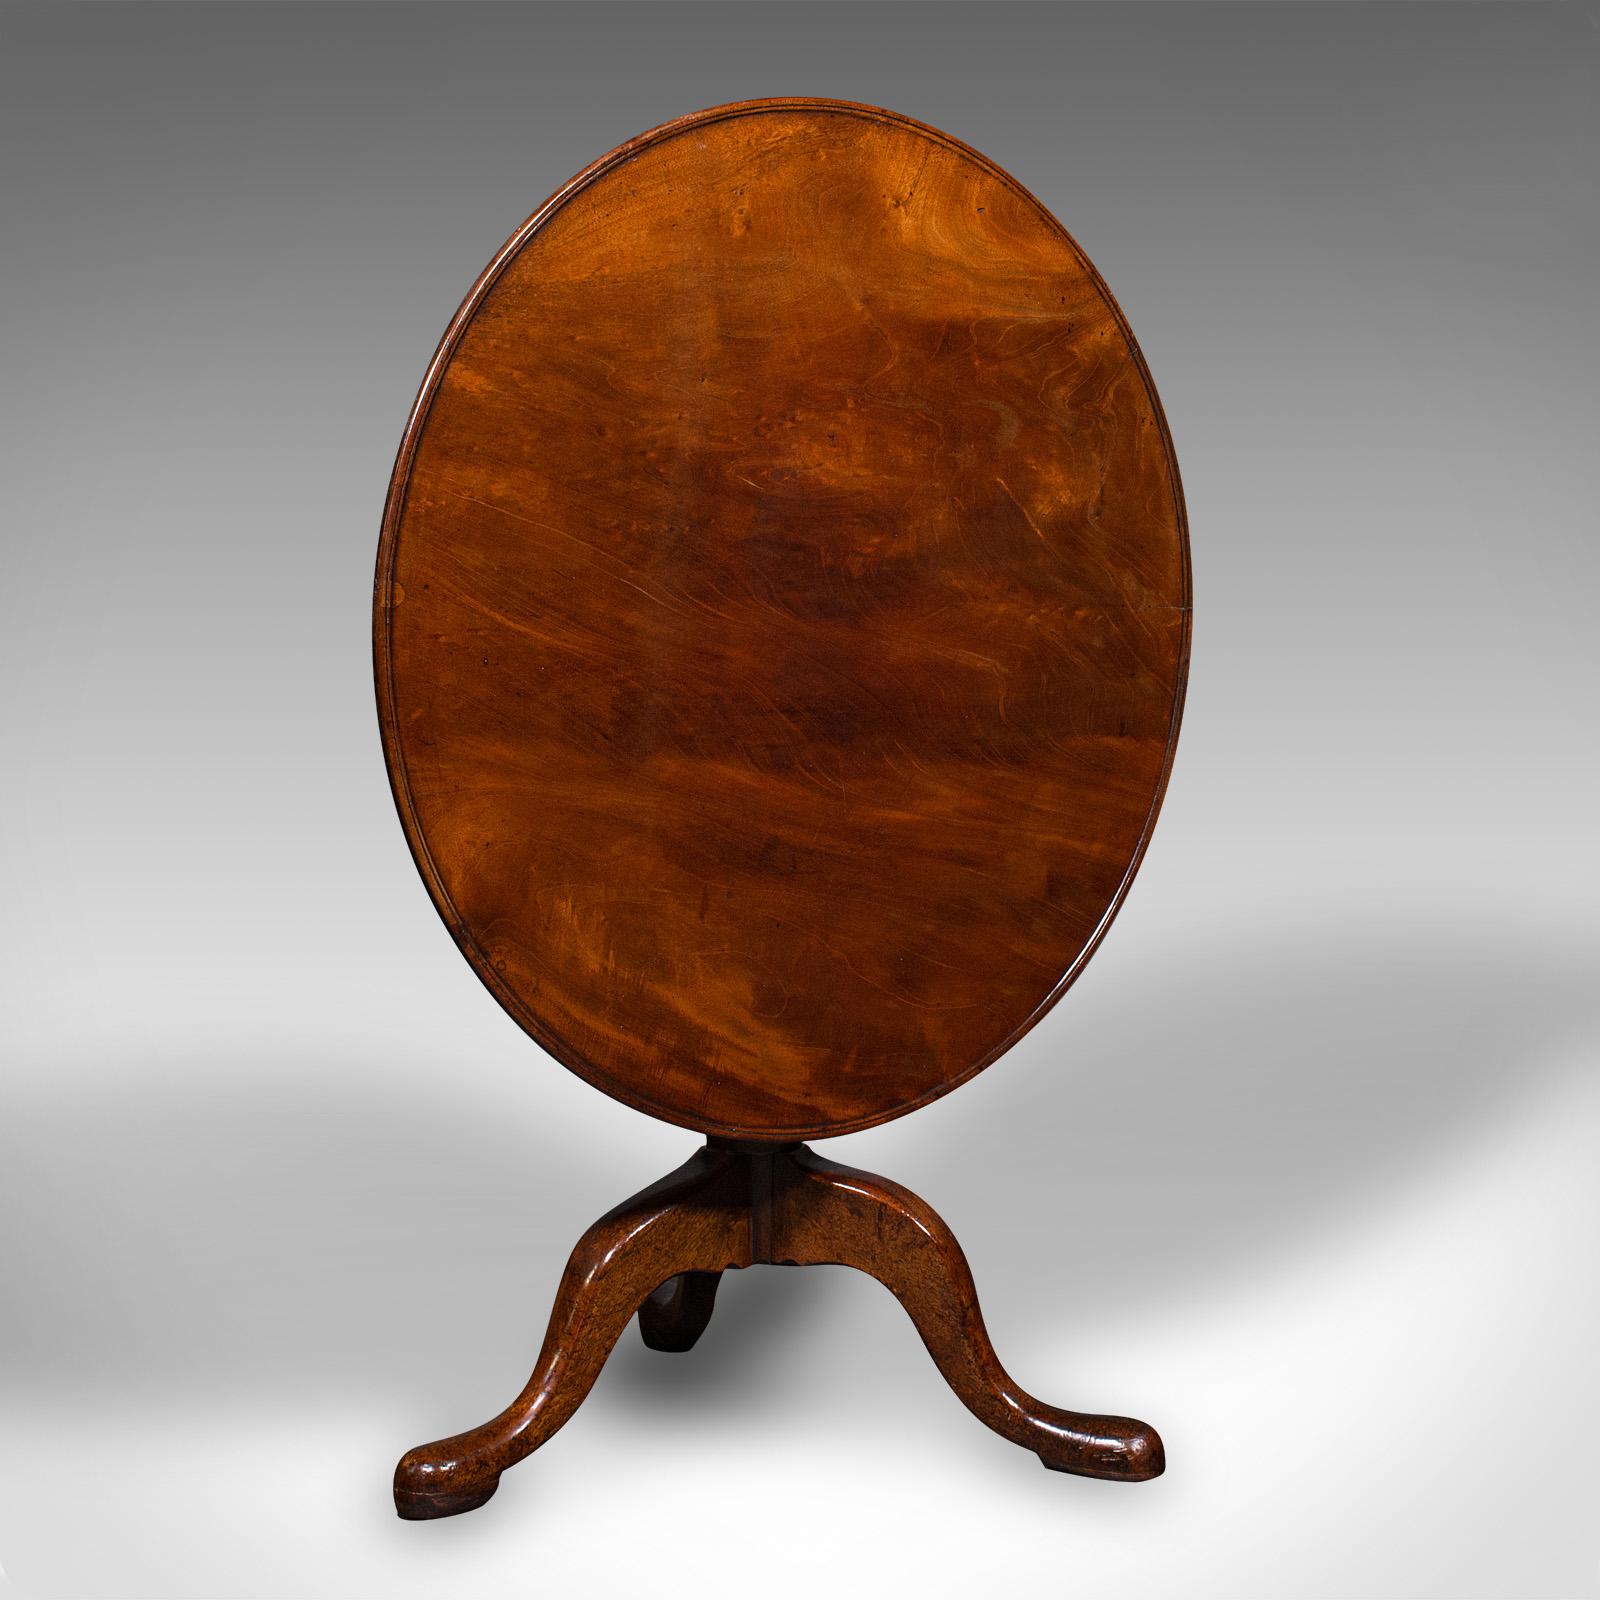 This is a wide antique tilt-top table. An English, mahogany reception hall or breakfast table, dating to the Georgian period, circa 1780.

Striking table with generous proportion and superb figuring
Displays a desirable aged patina and in good